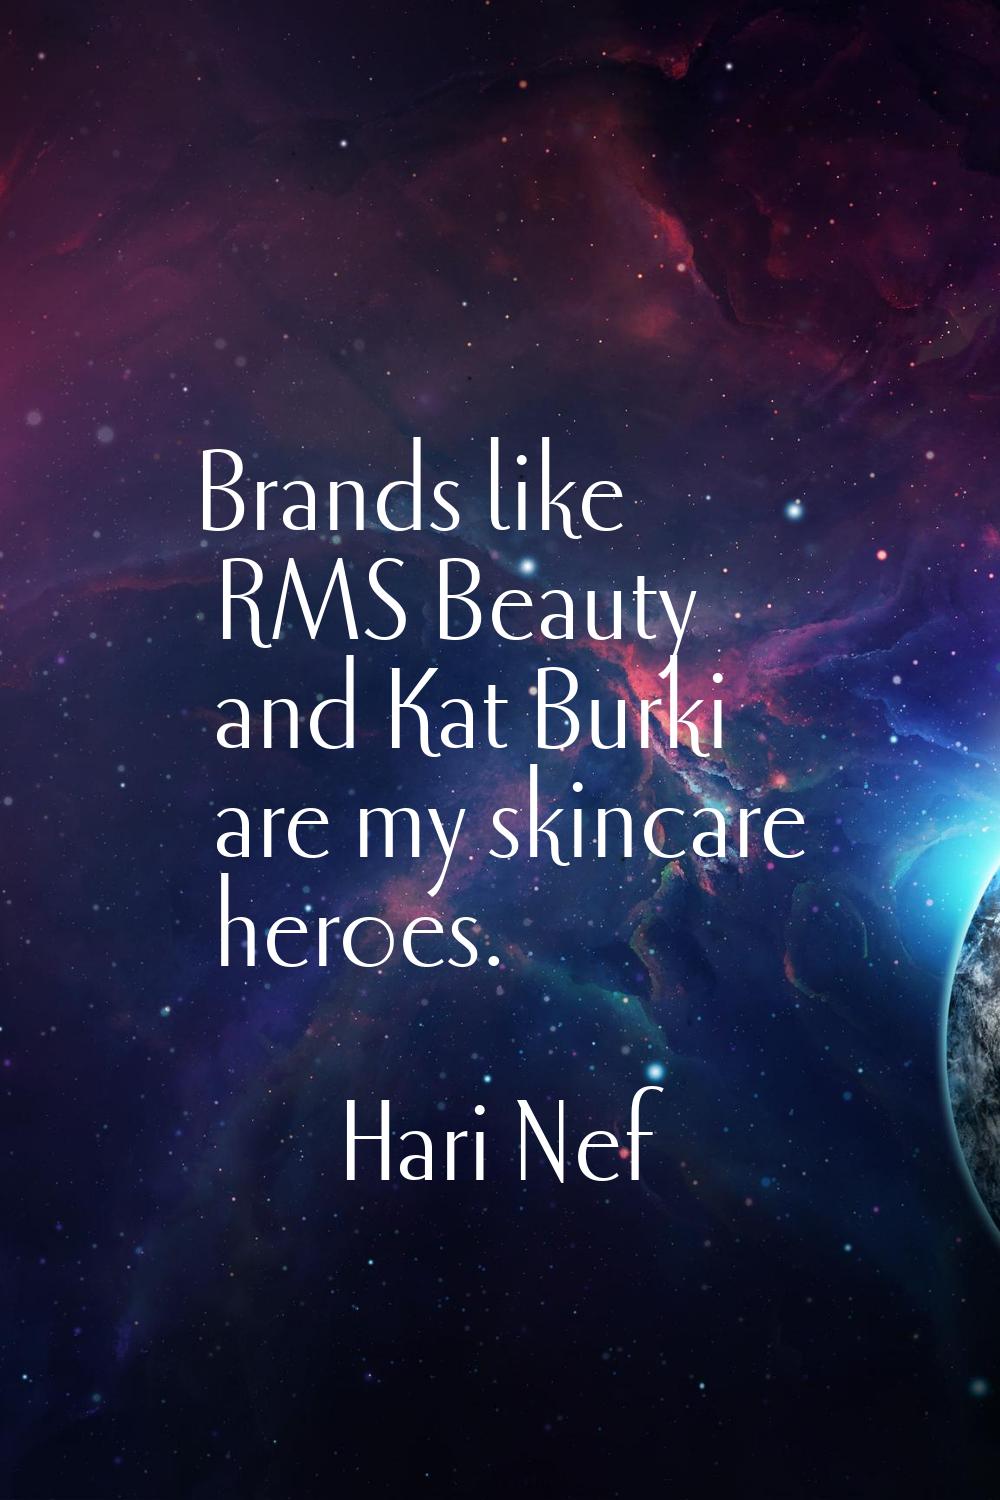 Brands like RMS Beauty and Kat Burki are my skincare heroes.